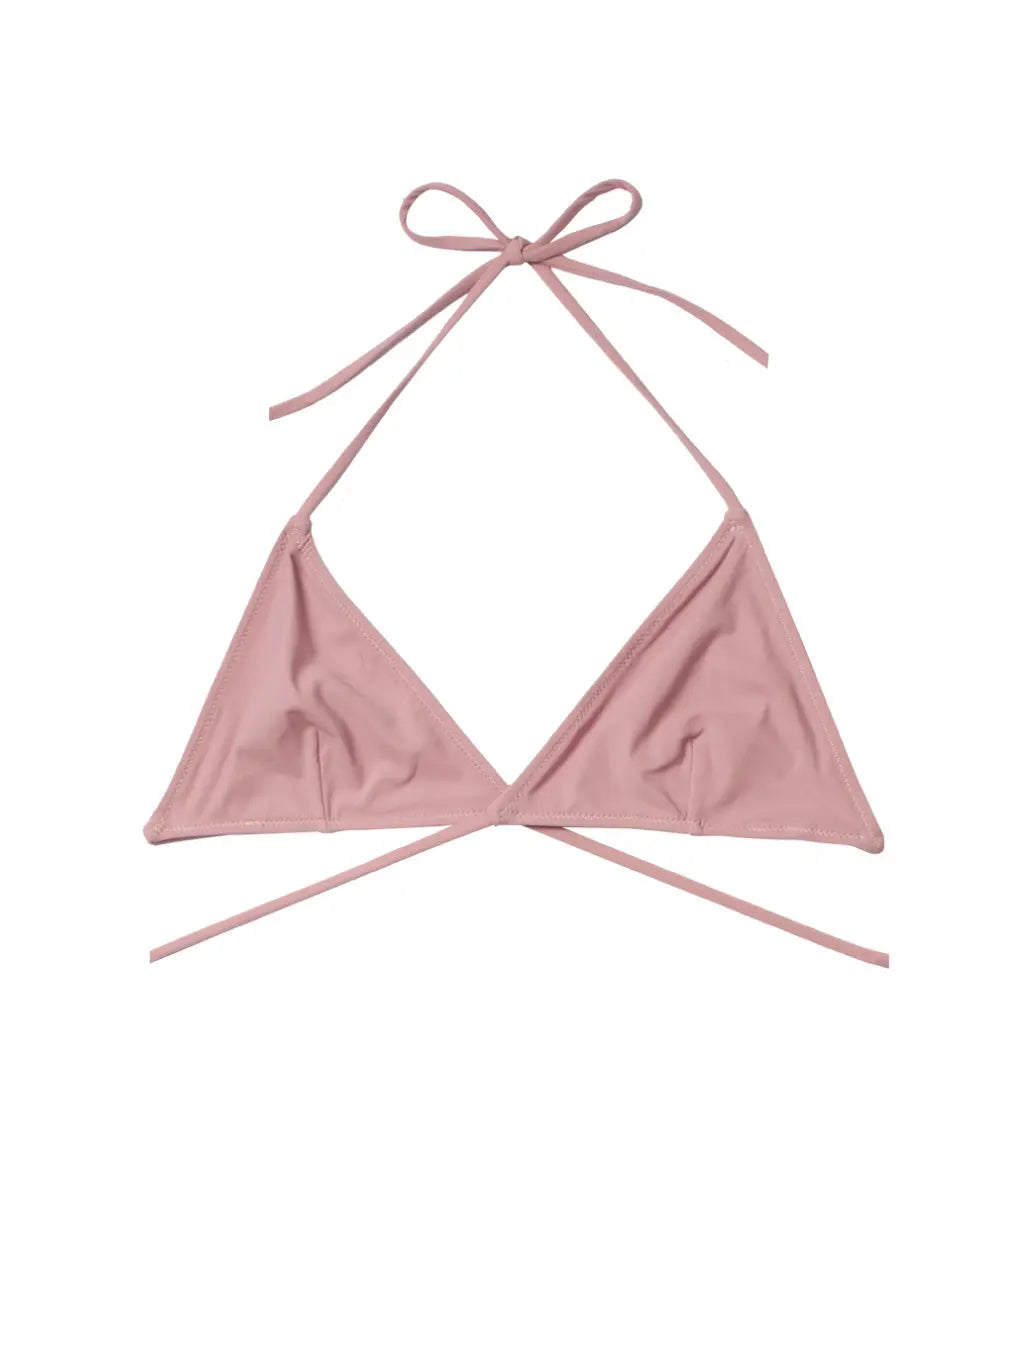 A pink Tredici Rose Bikini Top with adjustable straps tied at the neck and back. The top has minimal coverage and no padding, designed in a simple and classic style. Available now at Bassalstore in Barcelona. The background is plain white.